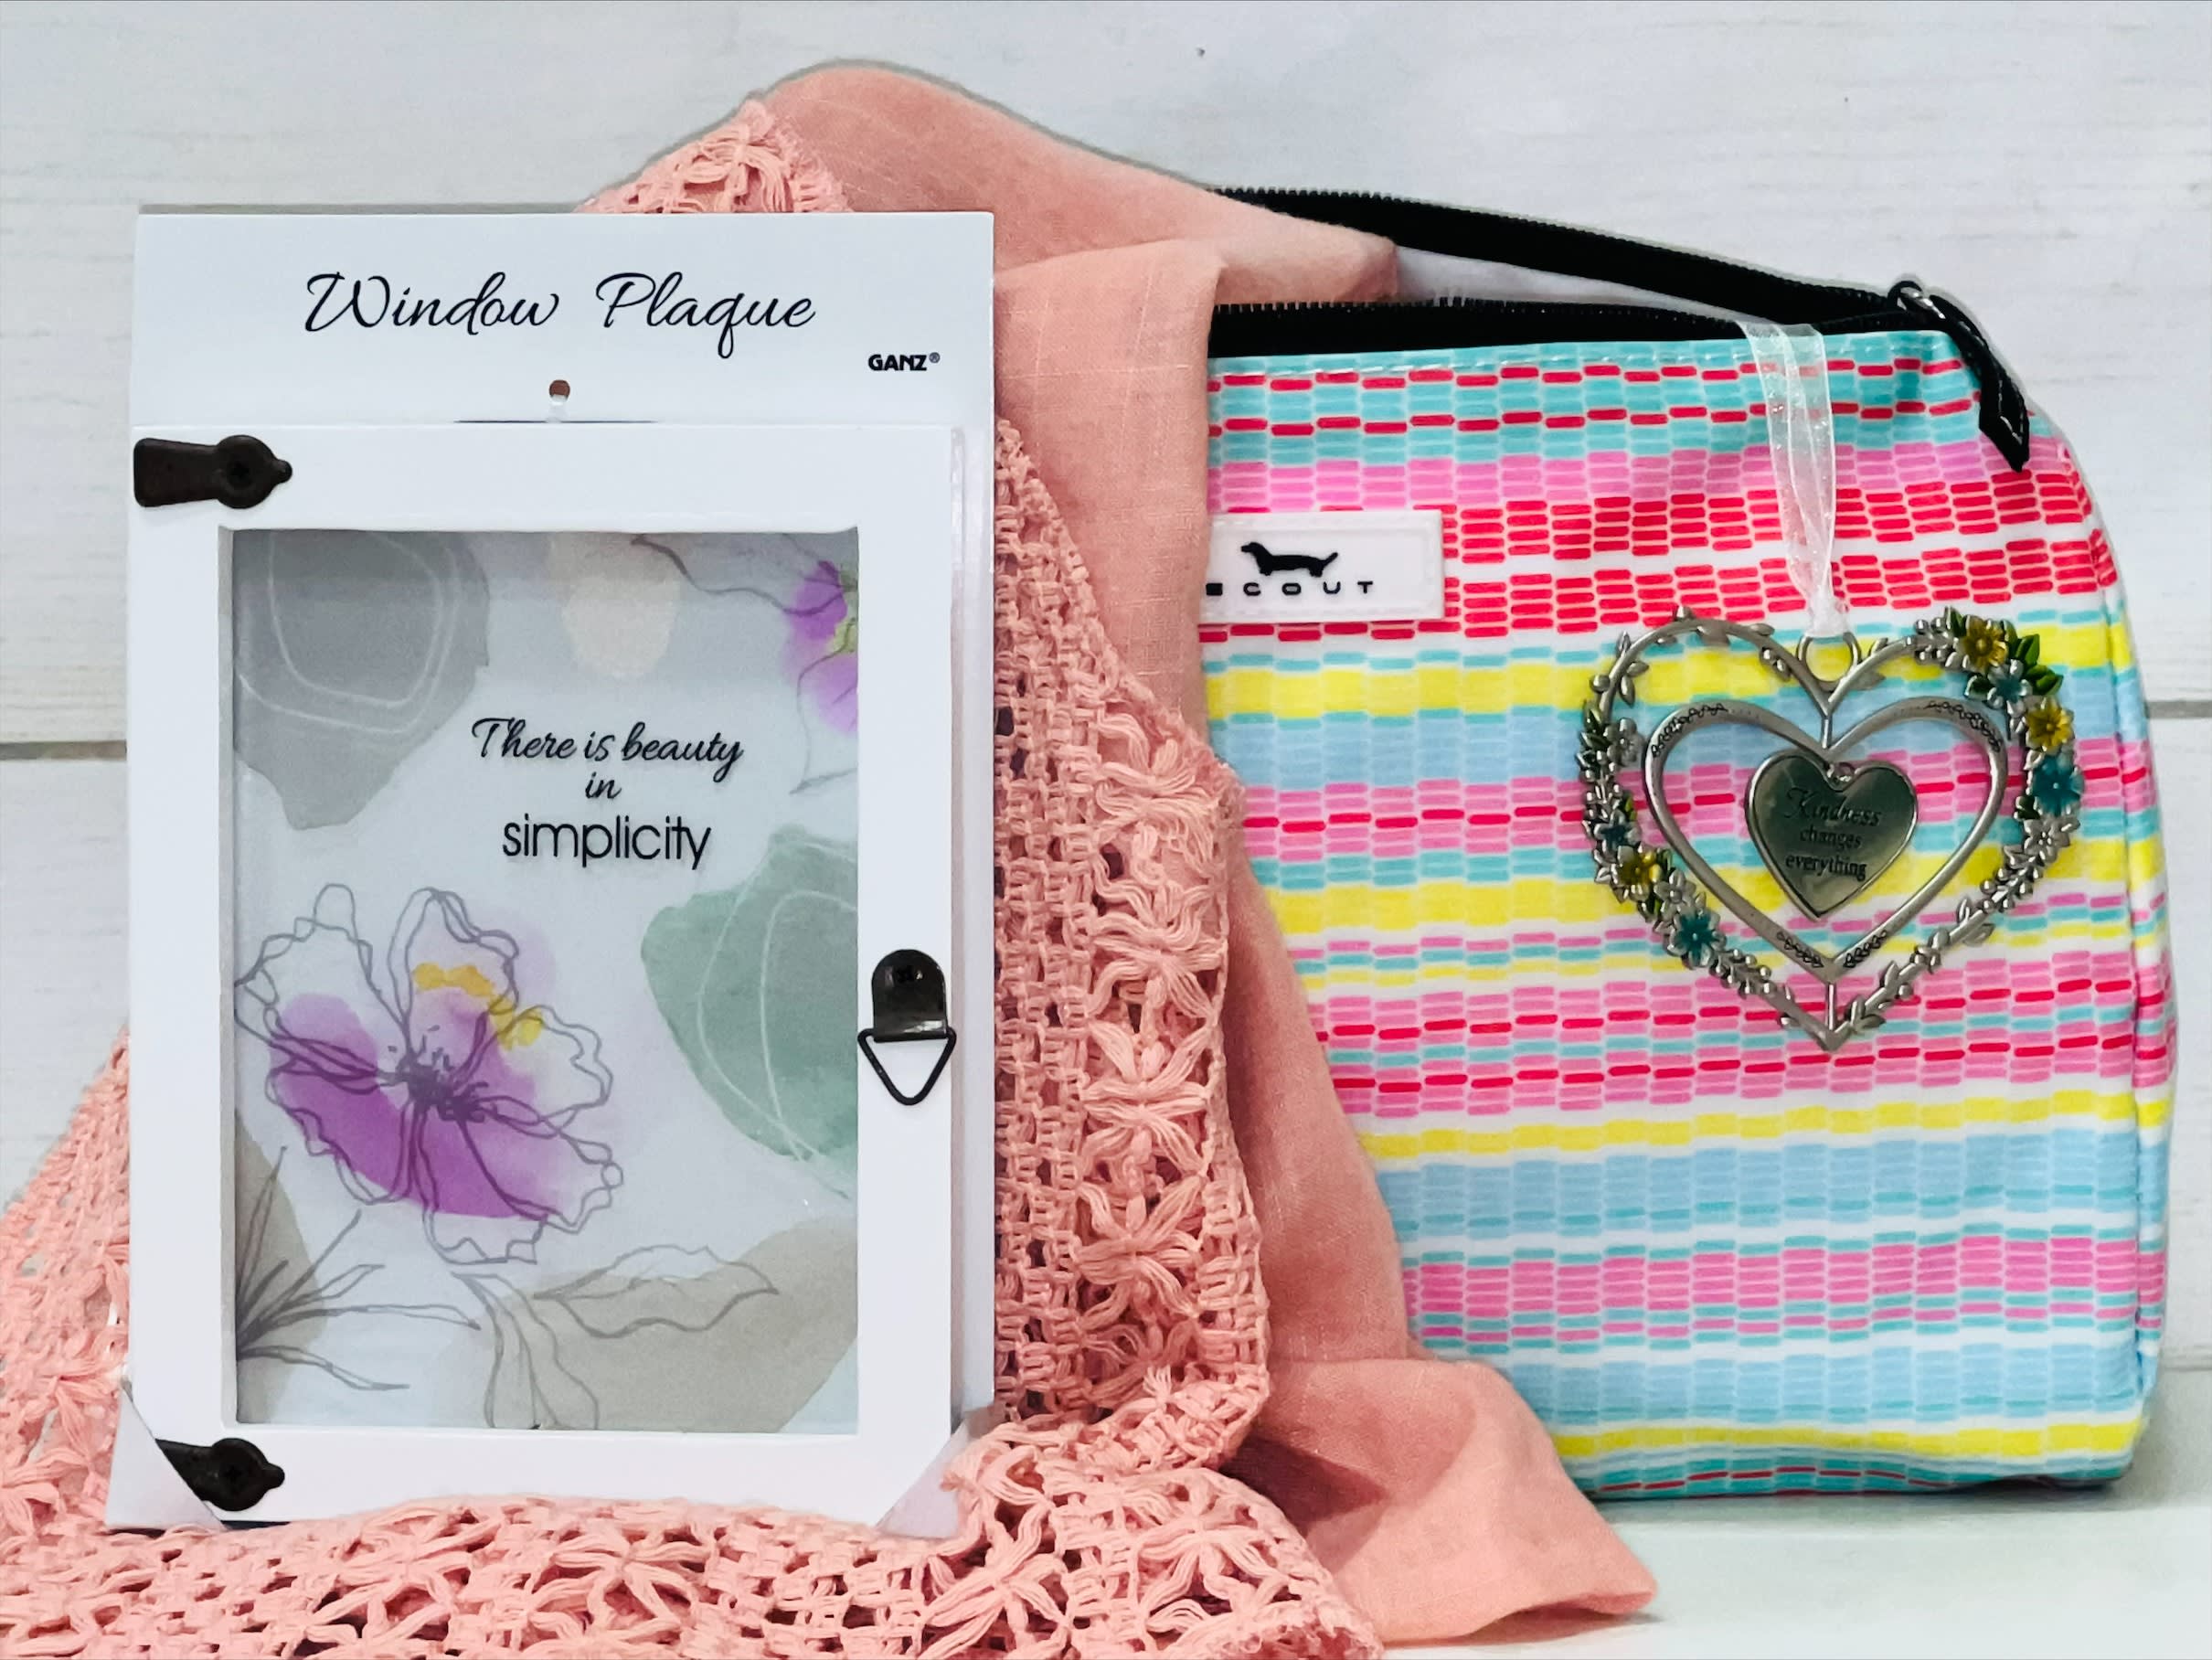 Deluxe Gift Pack (Most popular) - This pack includes a a mix of our most popular gift items!!  Highlights include a Scout pouch, scarf, inspirational plaque and charm!  Valued at over $60!   